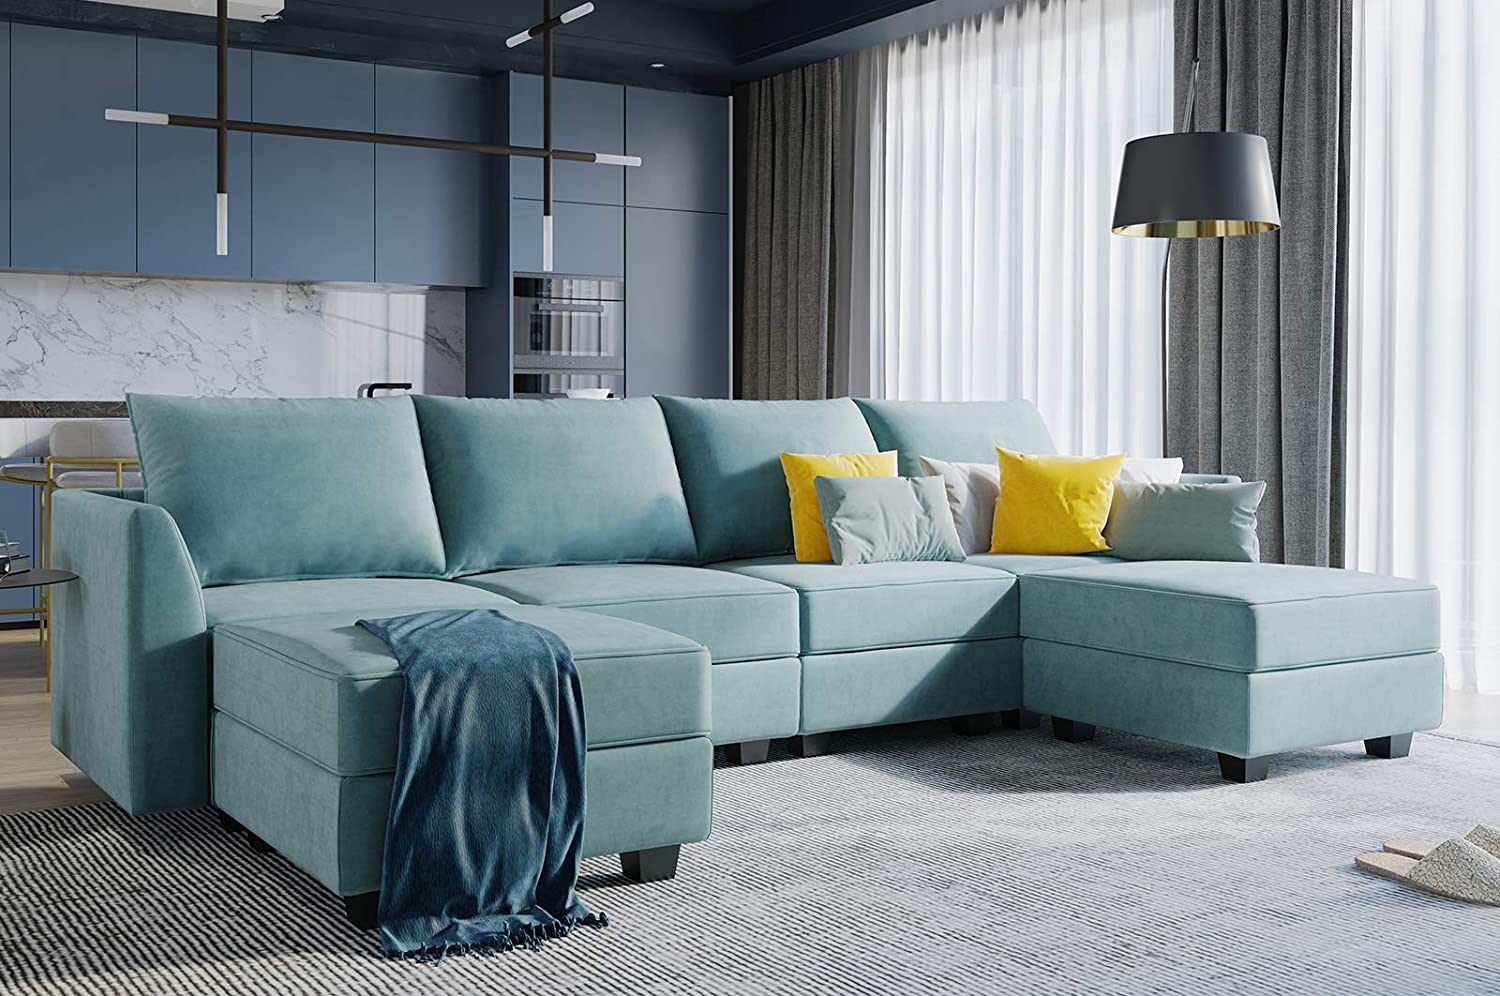 HONBAY Convertible Modular Sectional Sofa U-Shaped Couch with Storage ...